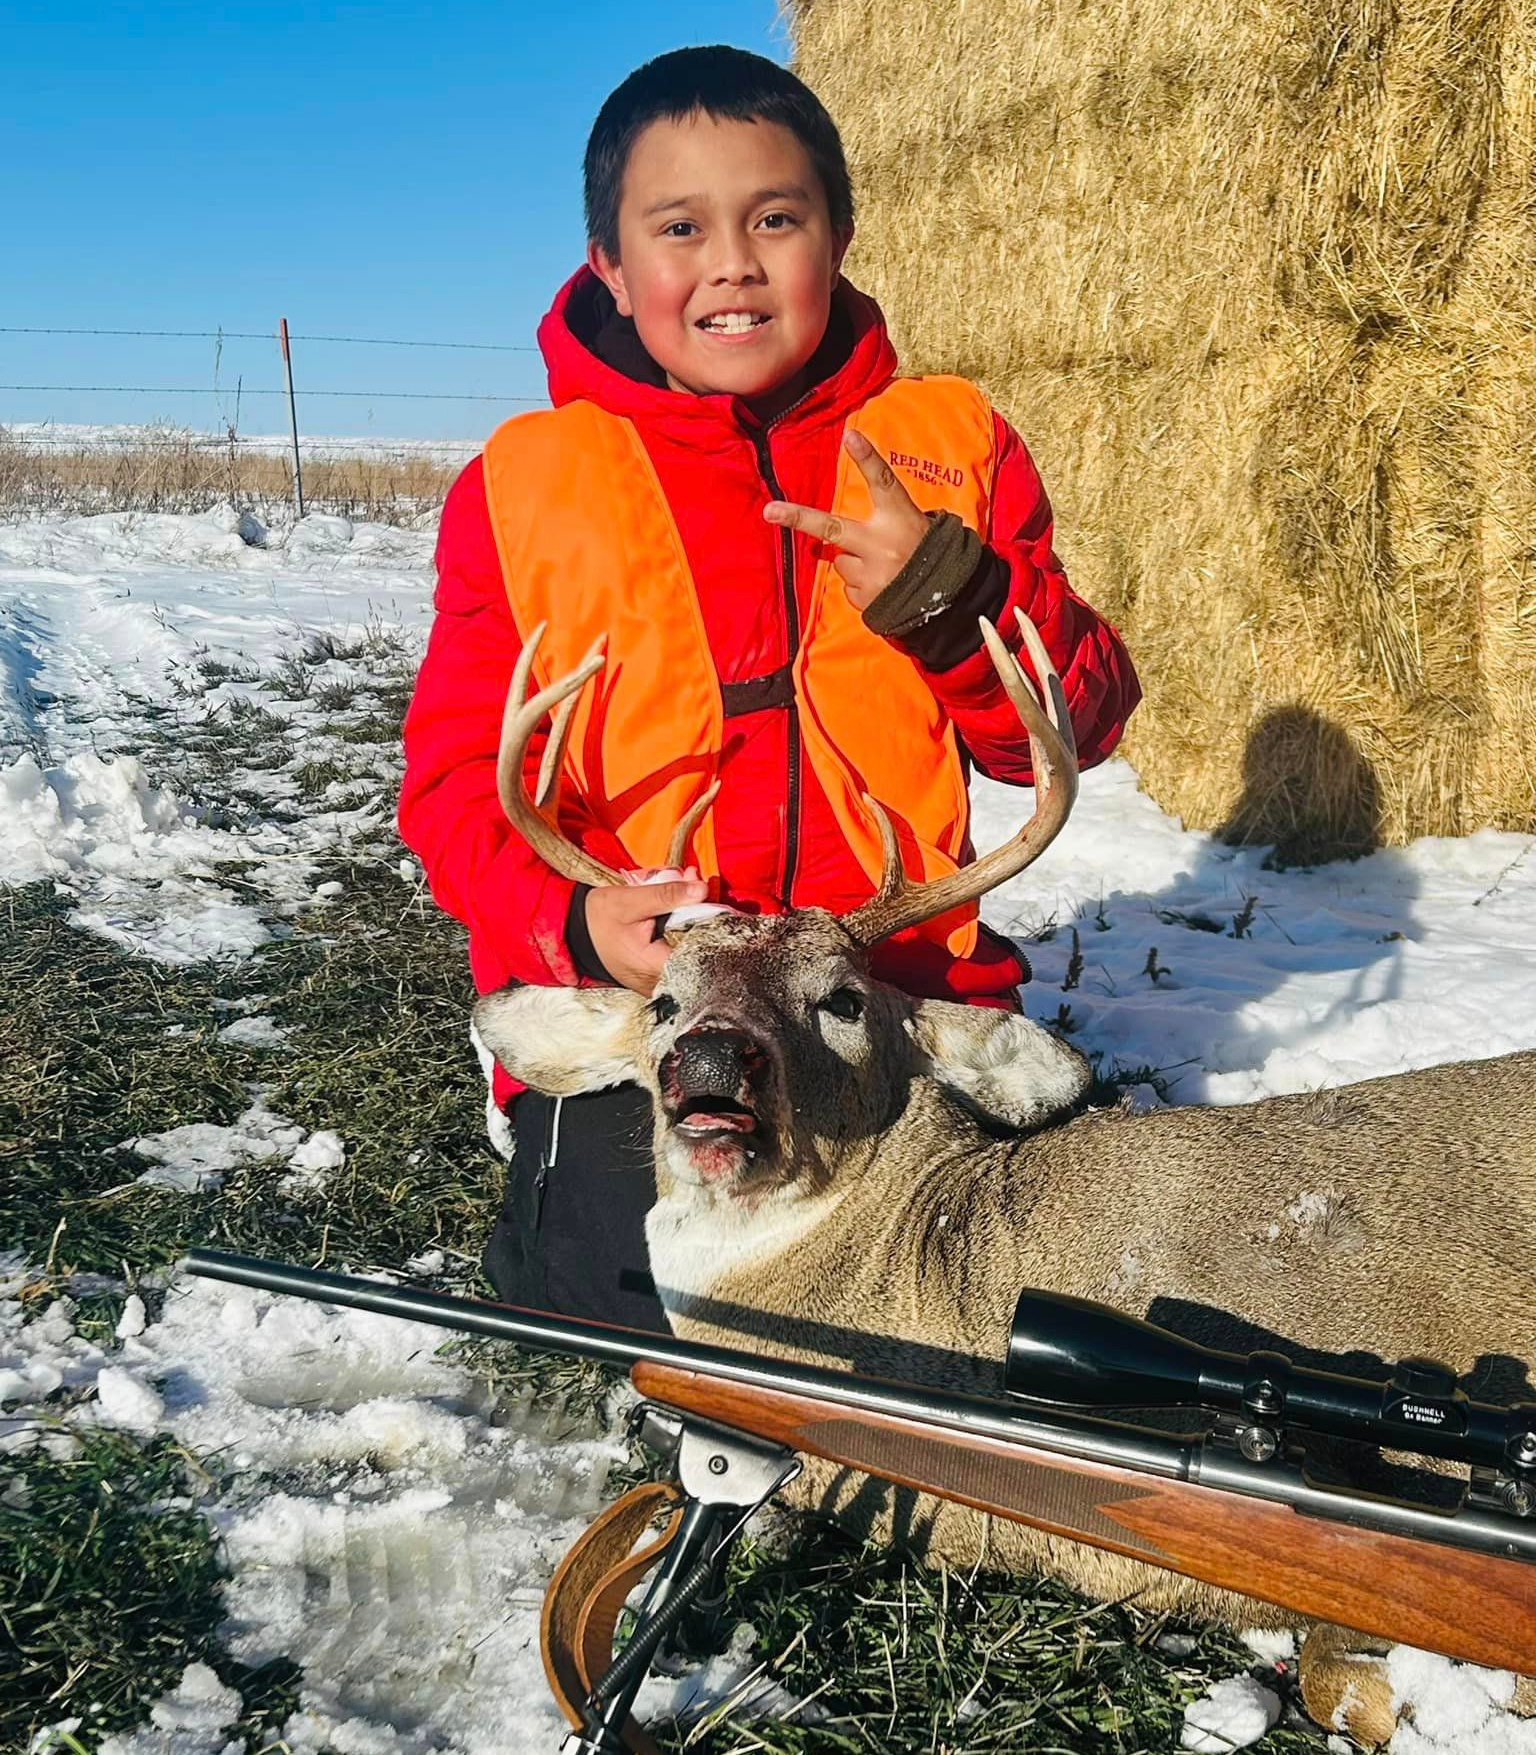 Zayden with his whitetail buck